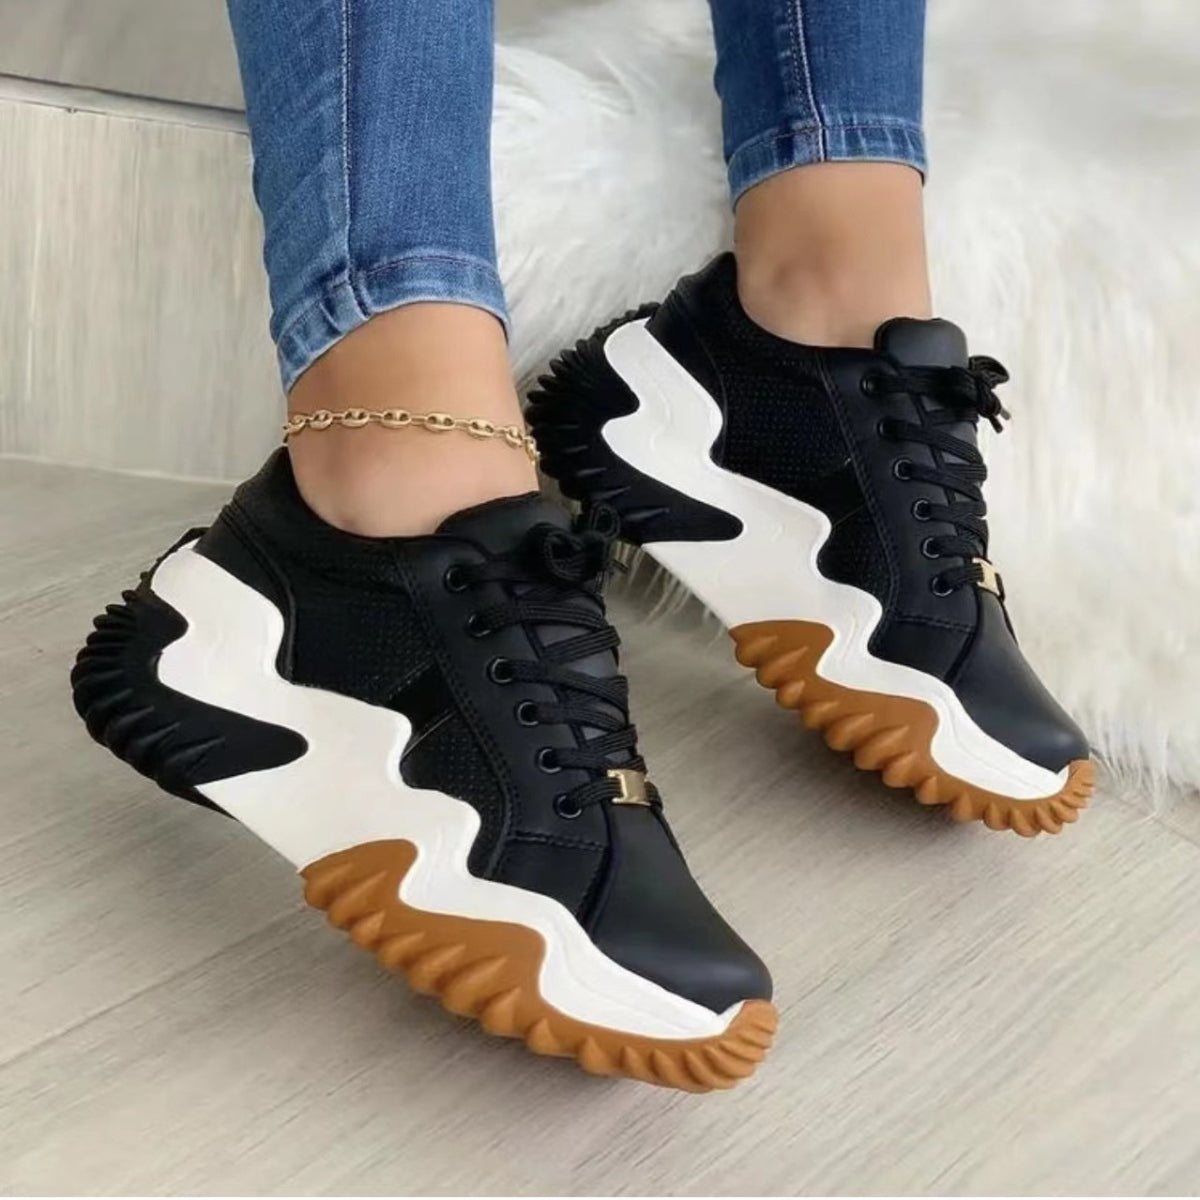 Lace Up PU Leather Platform Sneakers